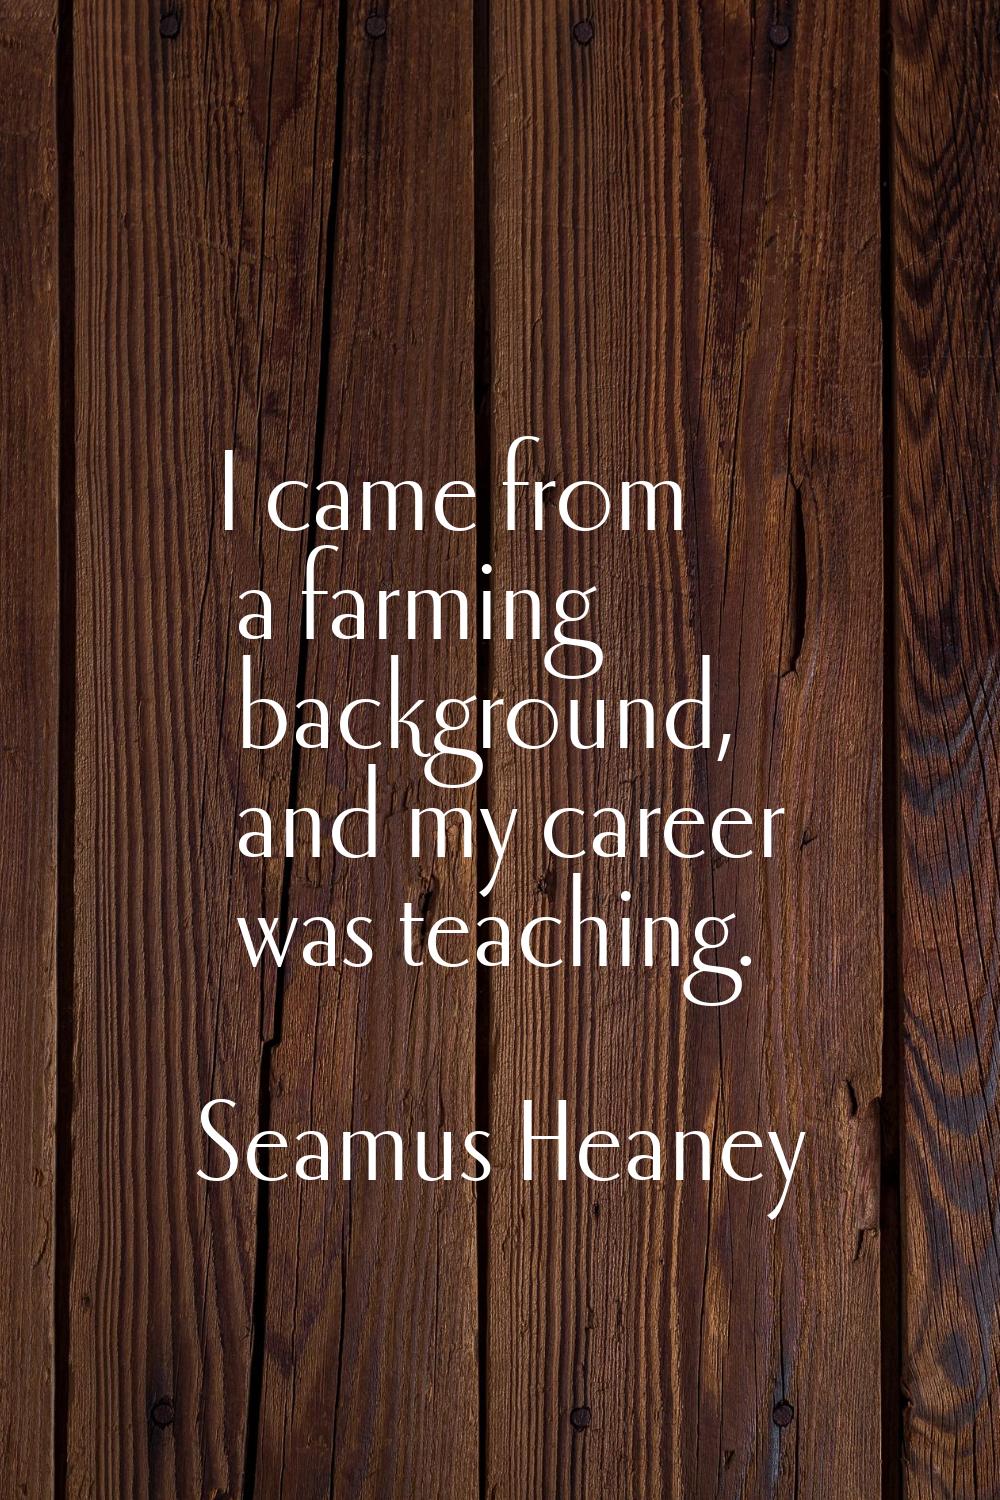 I came from a farming background, and my career was teaching.